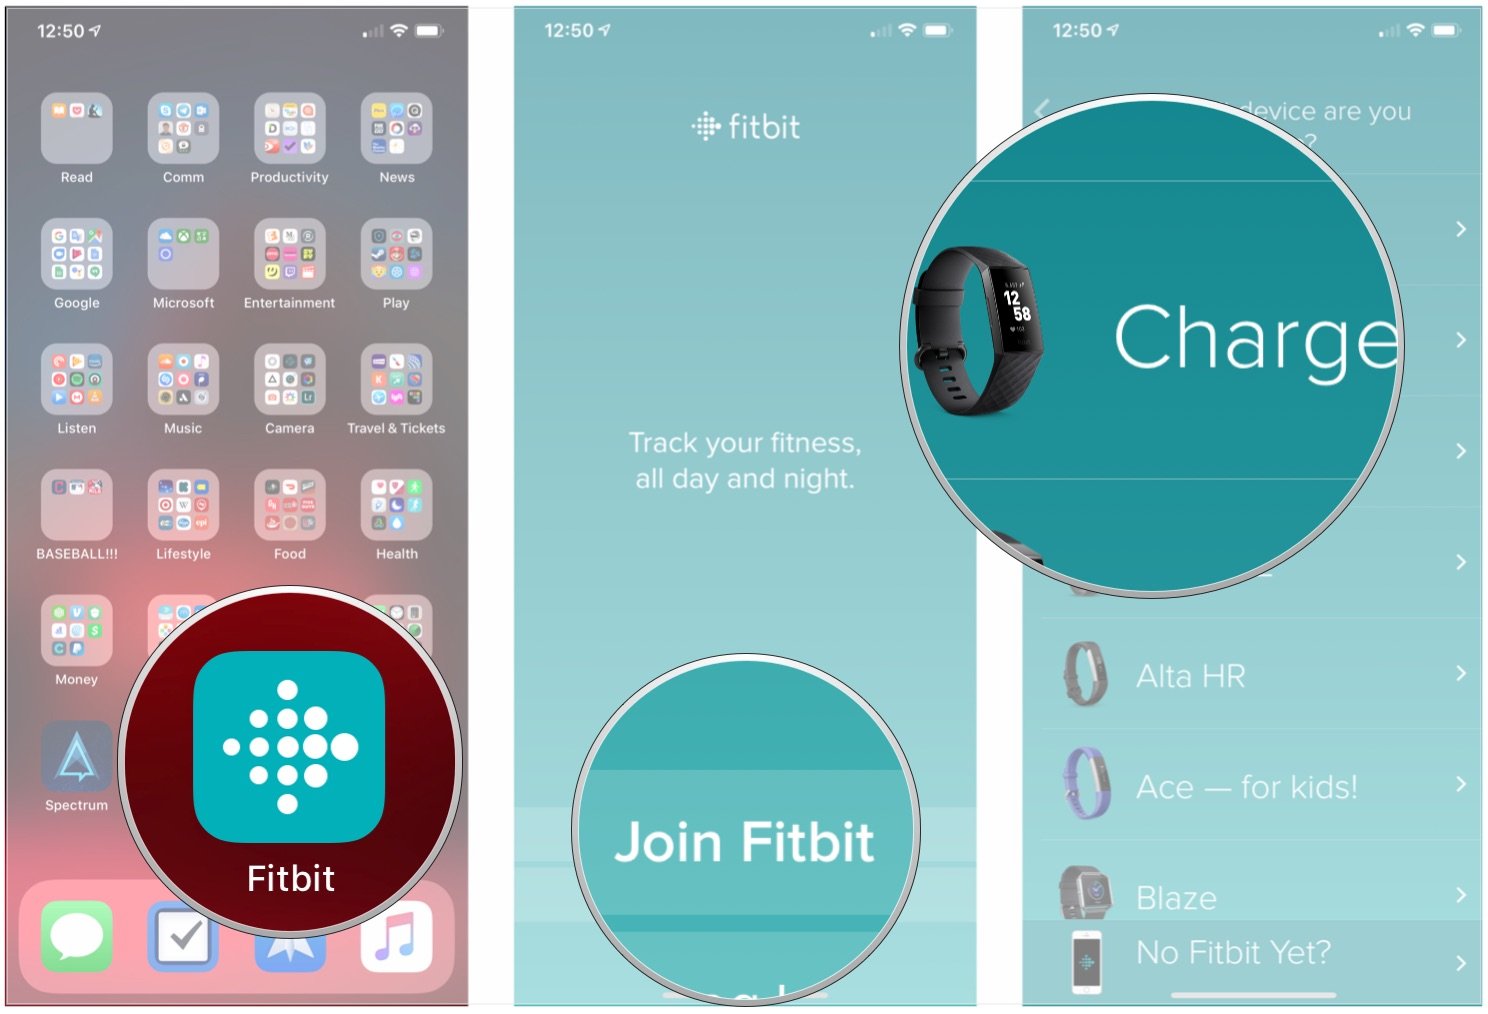 does fitbit work with iphone